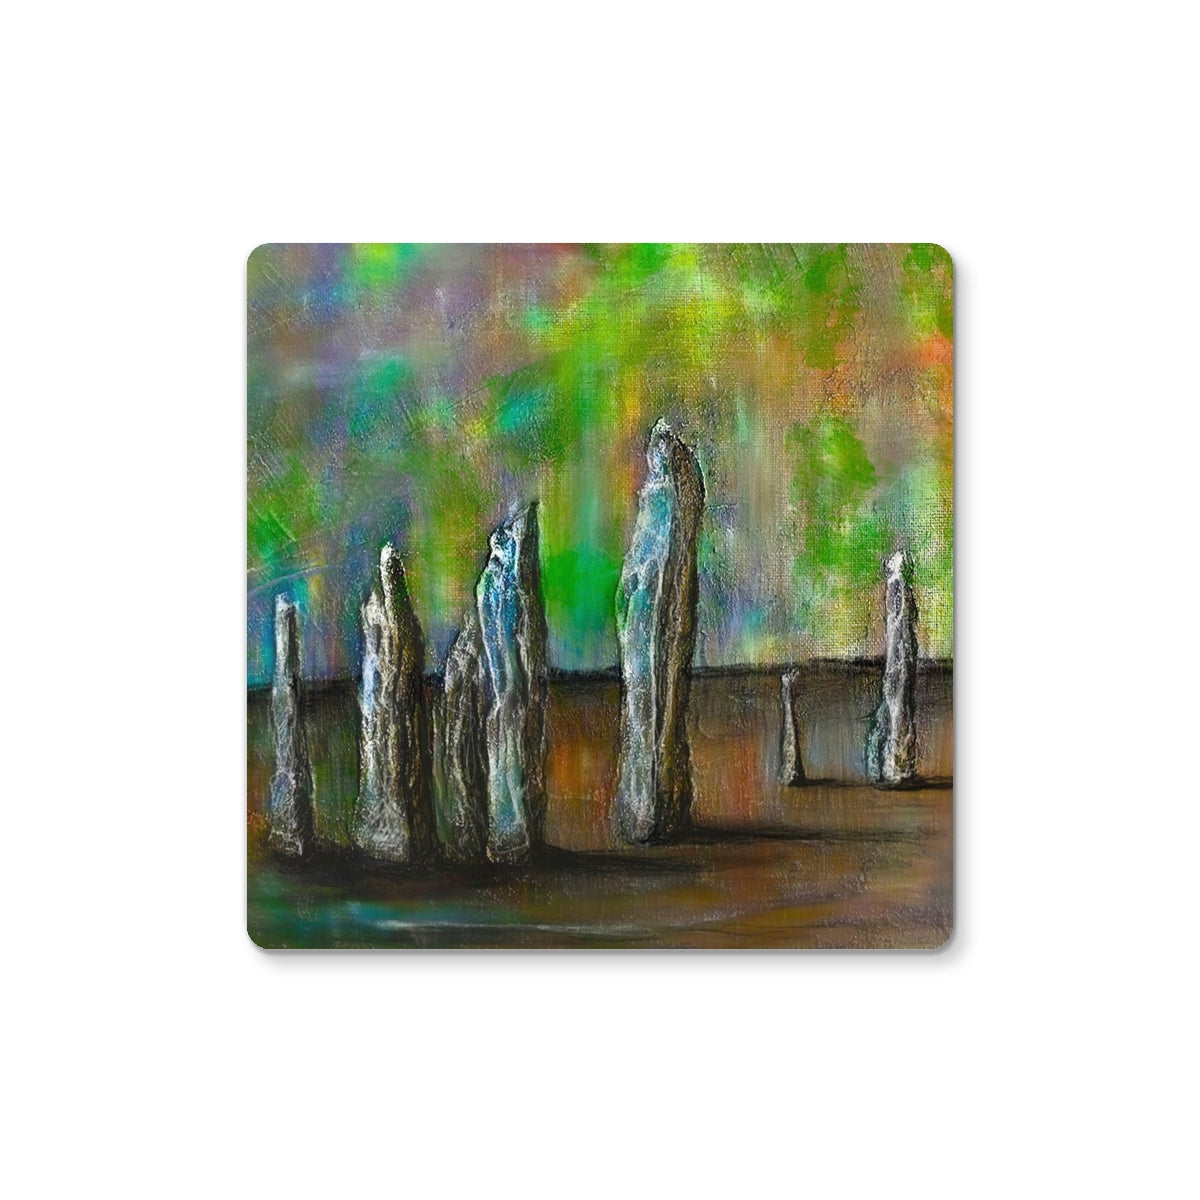 Callanish Northern Lights Art Gifts Coaster-Coasters-Hebridean Islands Art Gallery-4 Coasters-Paintings, Prints, Homeware, Art Gifts From Scotland By Scottish Artist Kevin Hunter